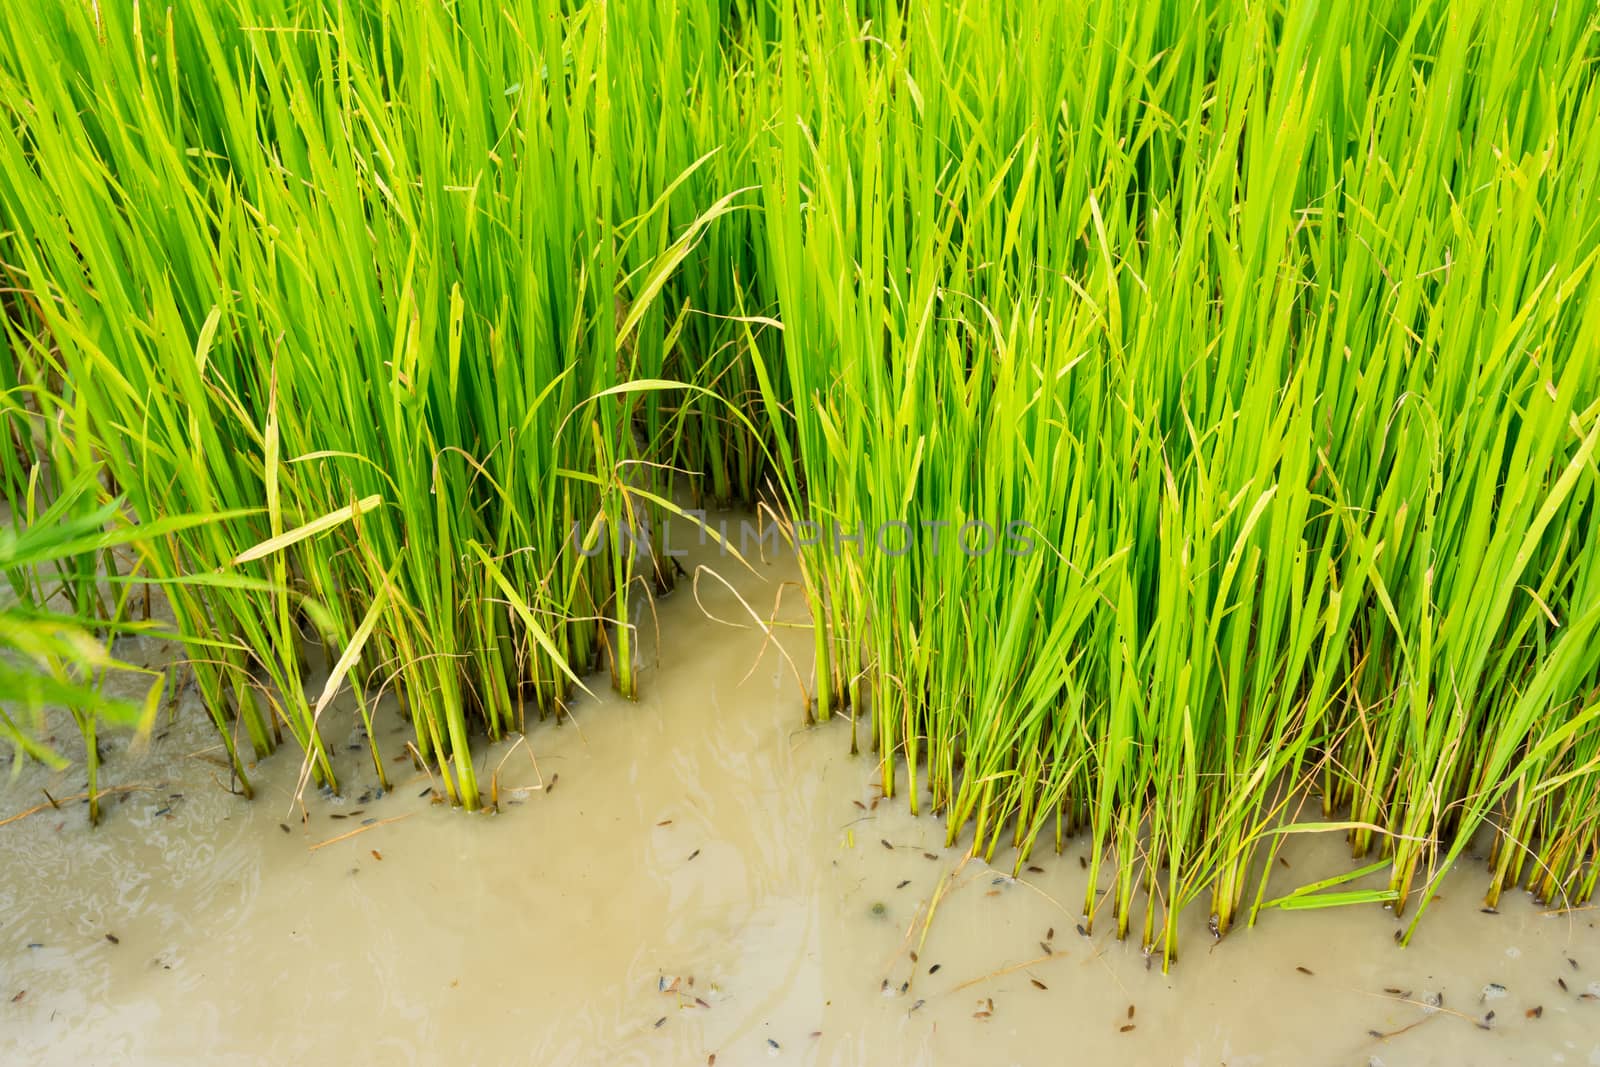 Rice plant in rice field near Chiang Mai, Thailand